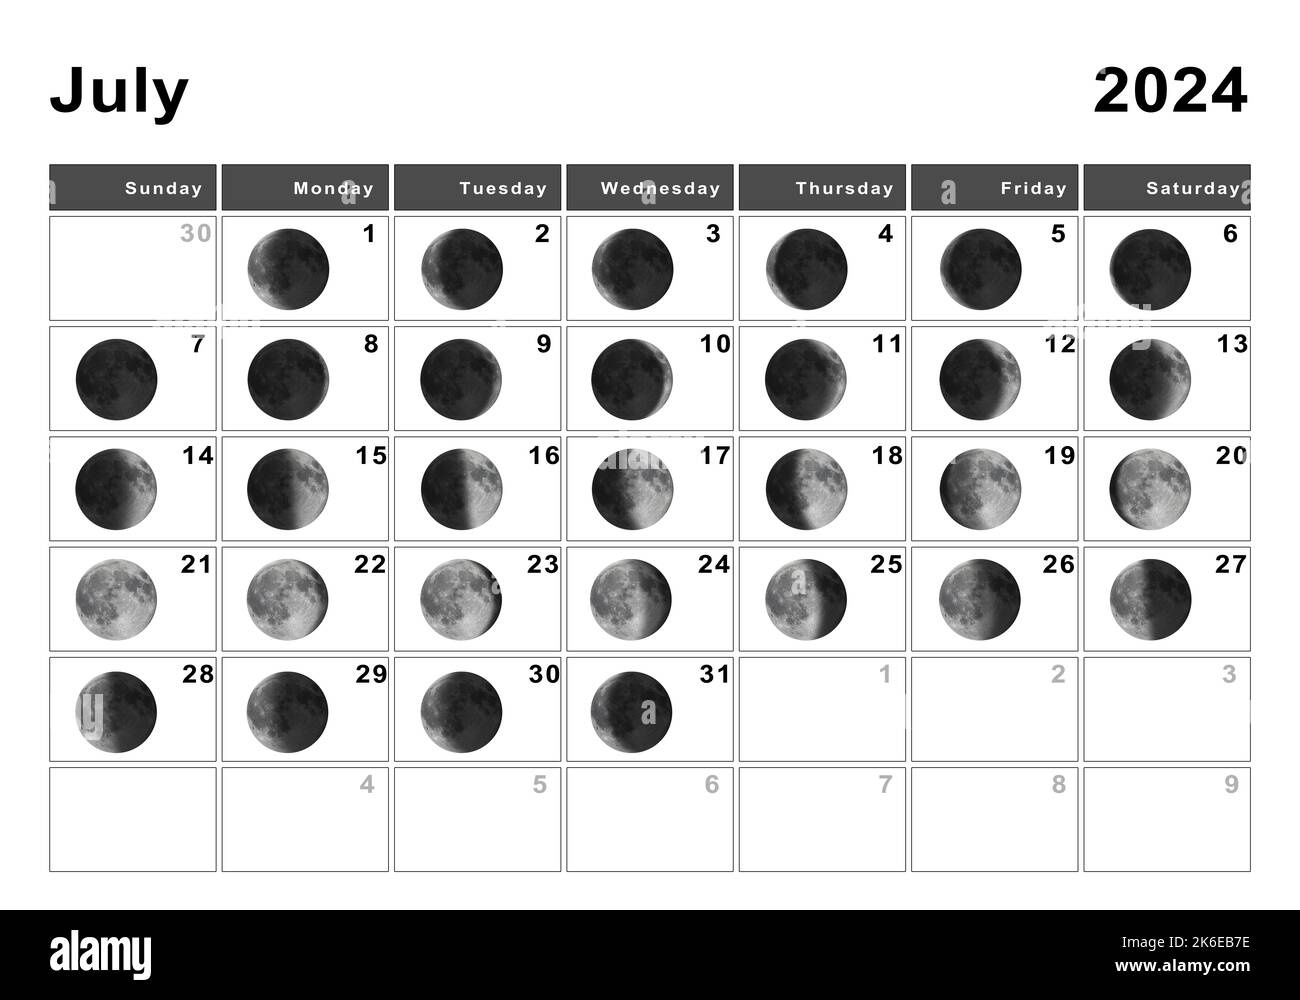 July 2024 Lunar Calendar, Moon Cycles, Moon Phases Stock Photo - Alamy pertaining to July Moon Calendar 2024